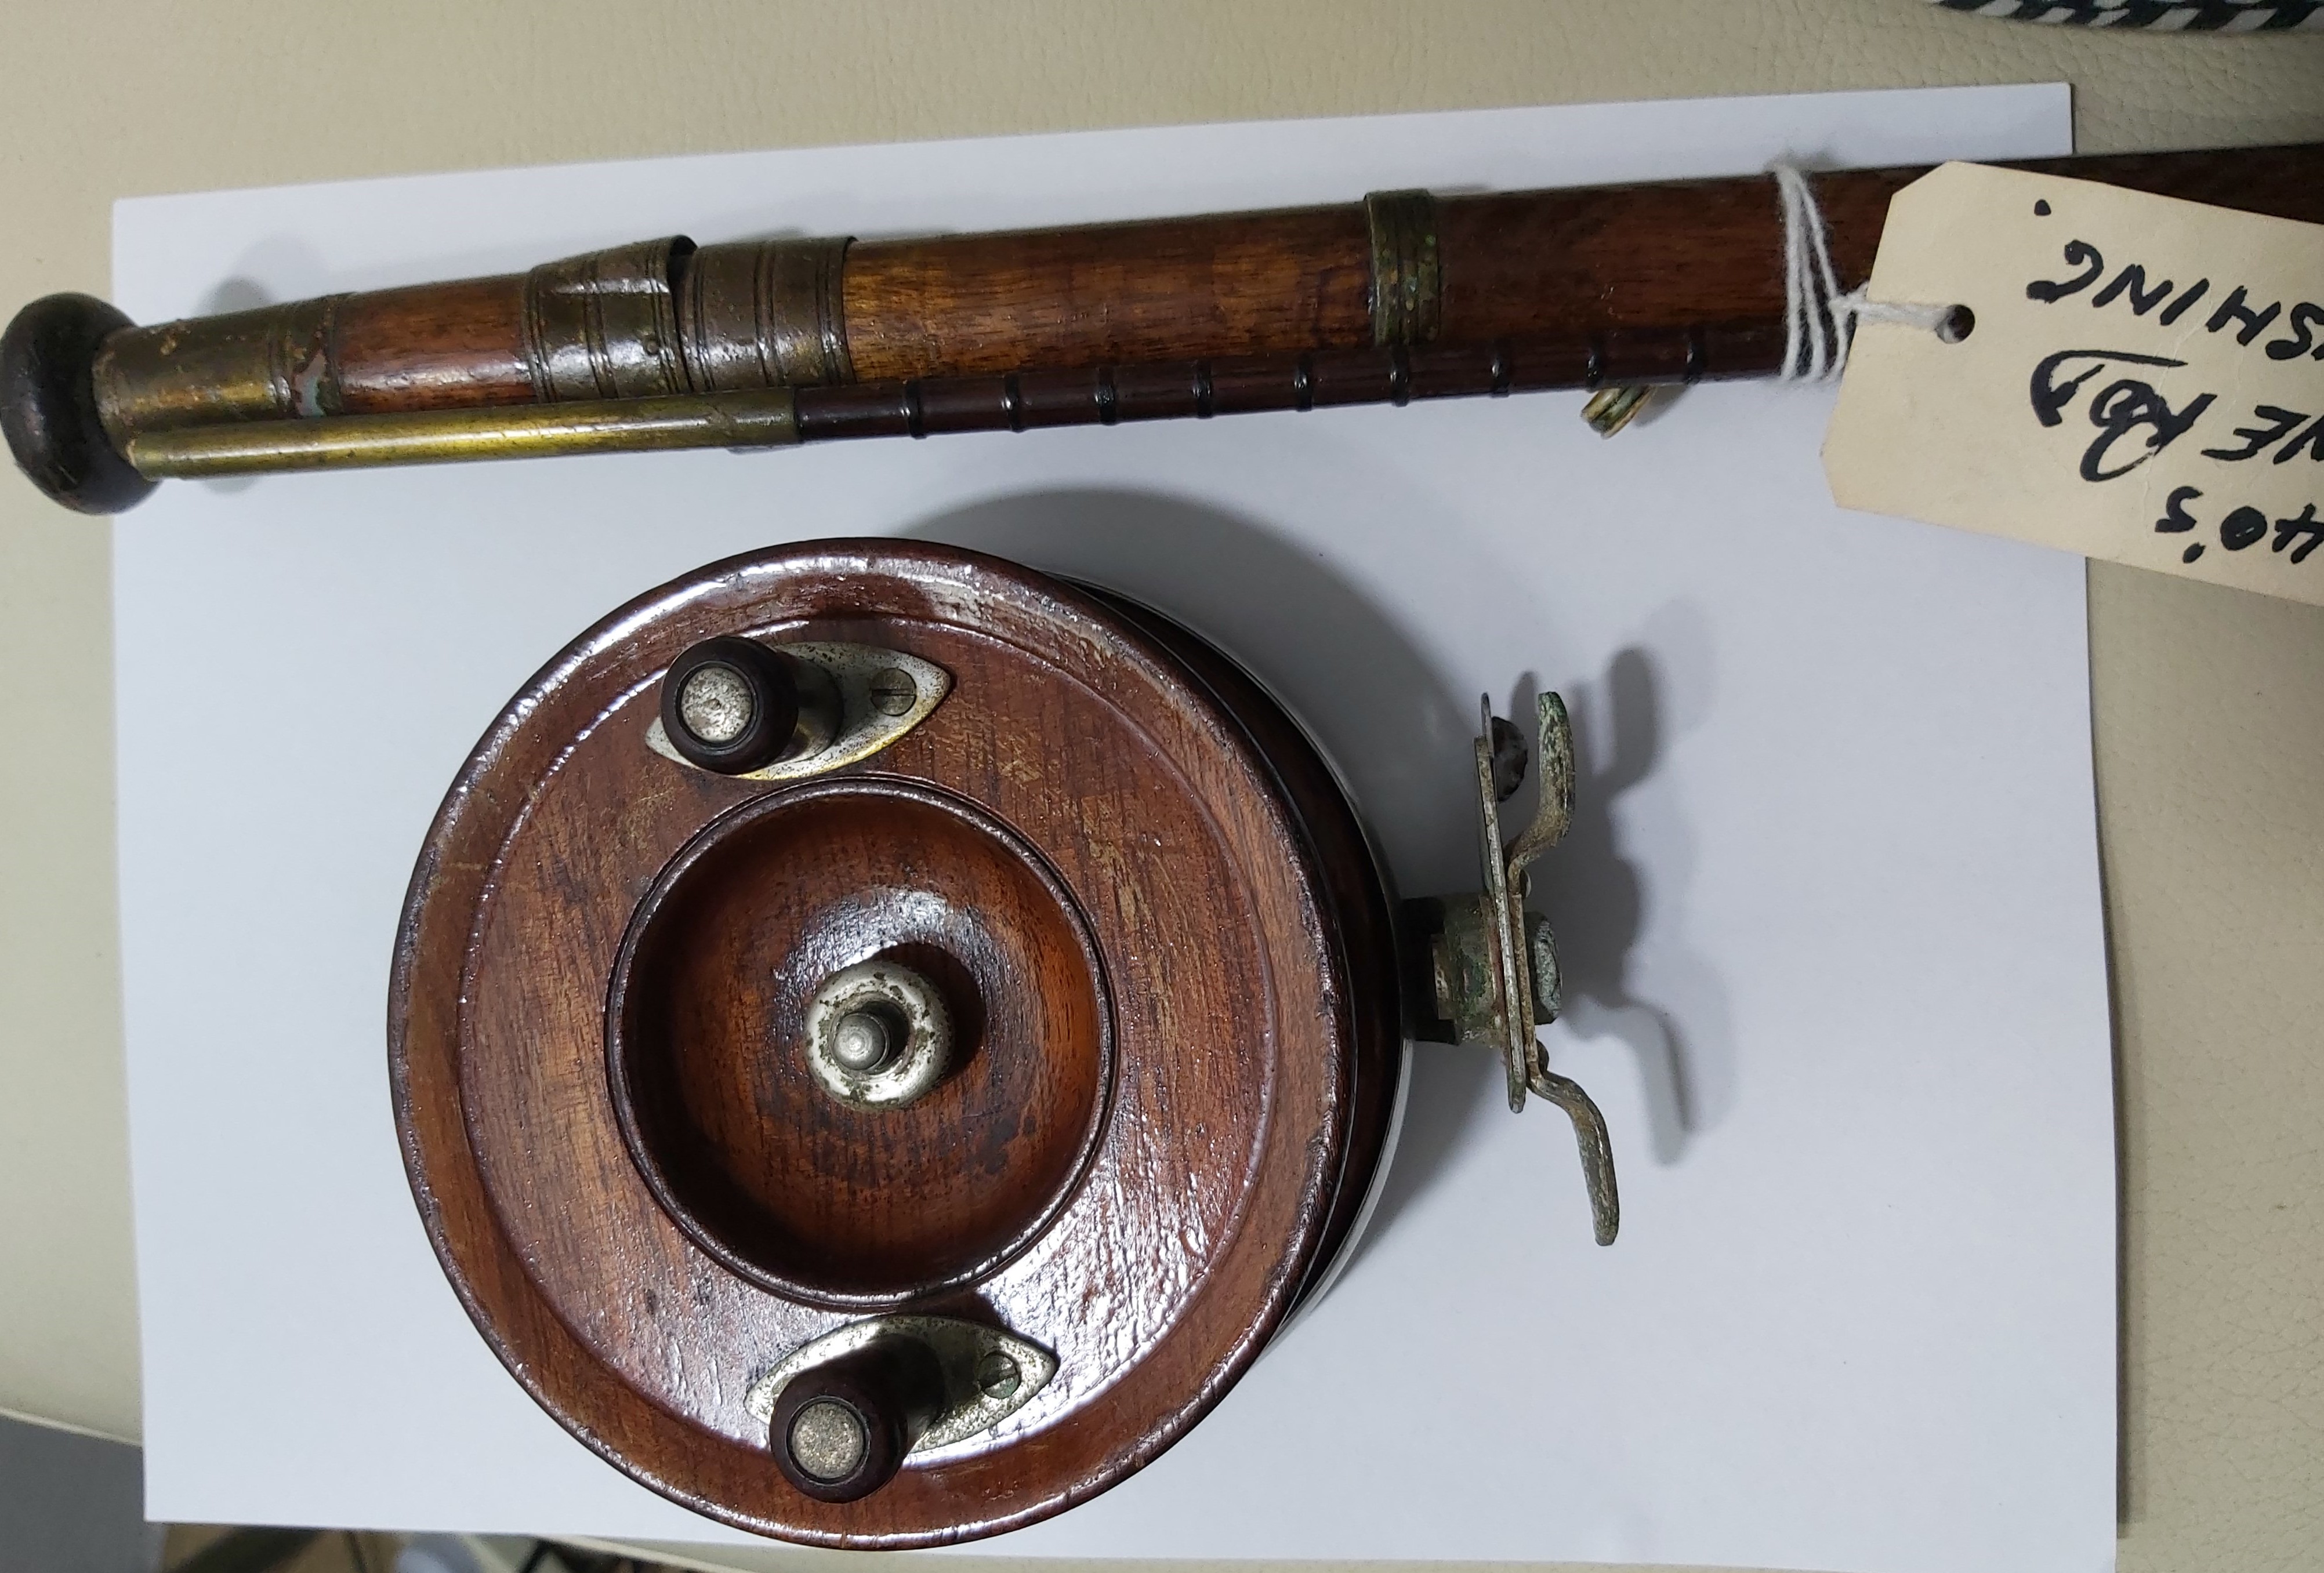 Does anyone know what these old vintage shakespeare rods and reels